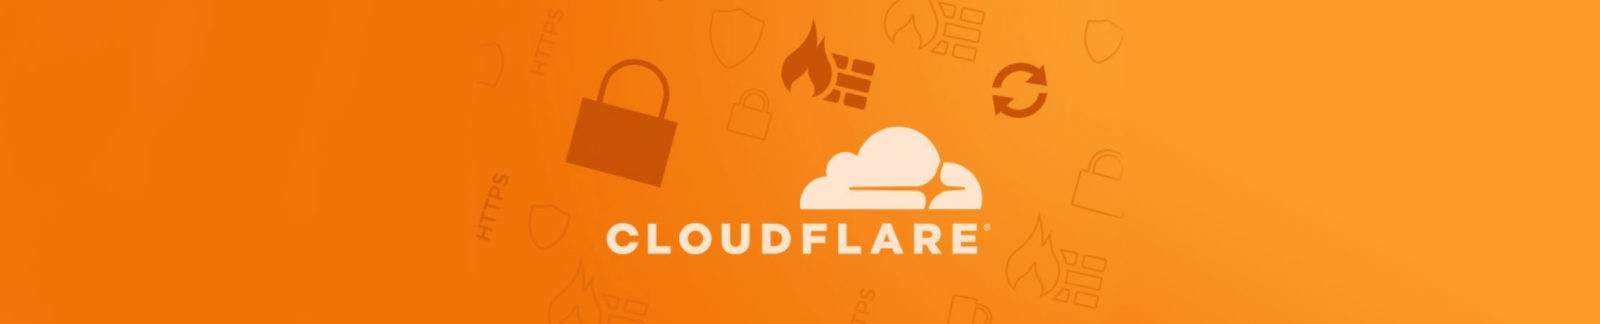 My CloudFlare Account Got Hacked and a Site 301 Redirected